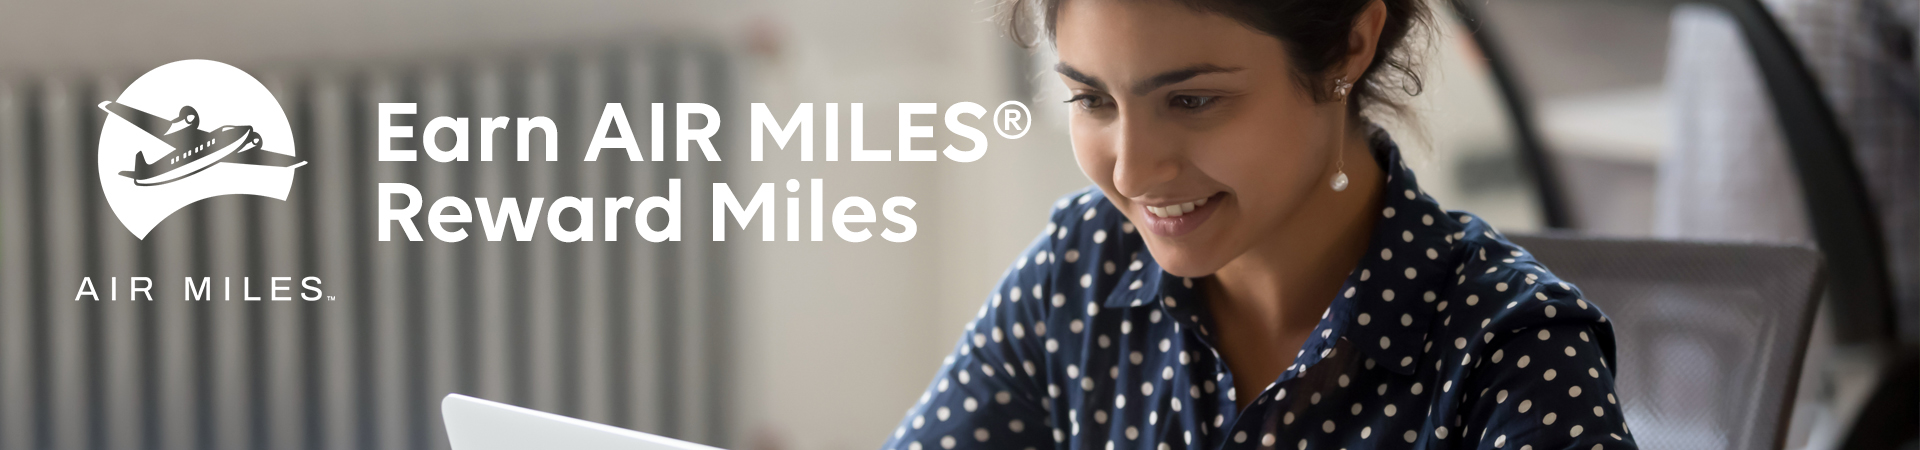 AIR MILES Promotion